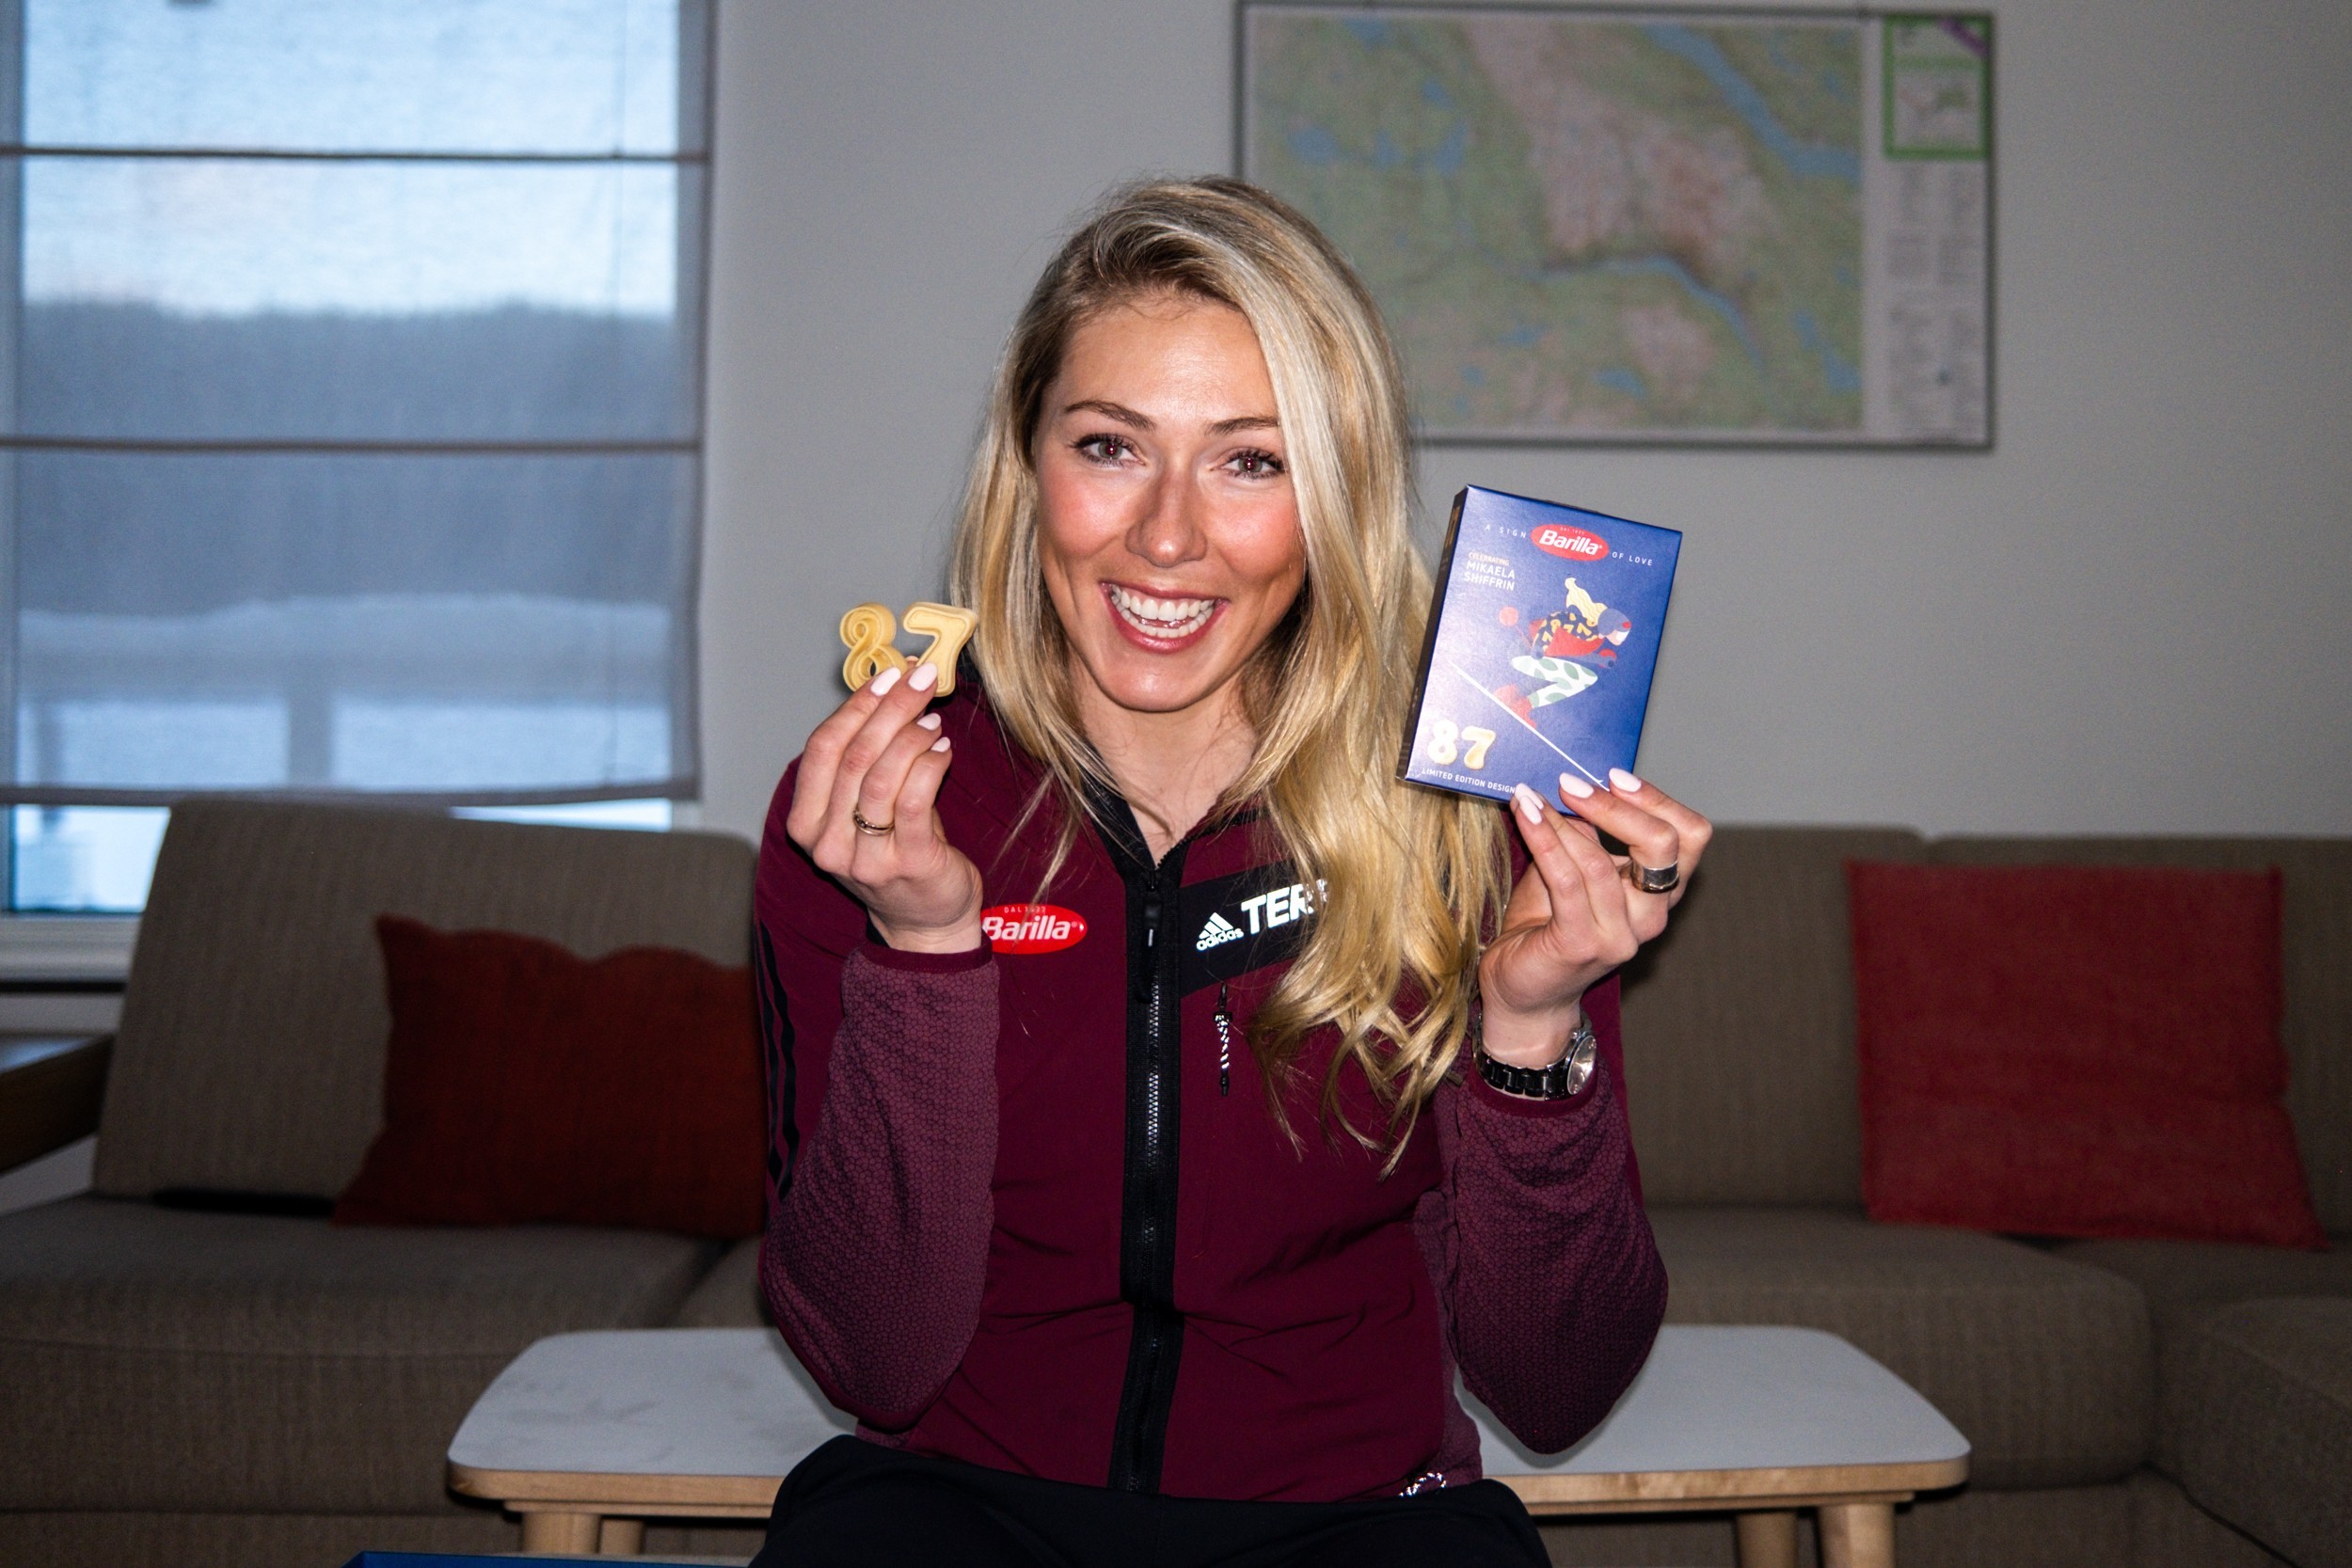 Barilla & Mikaela Shiffrin: Greatness starts with a great recipe - Pack No. 30